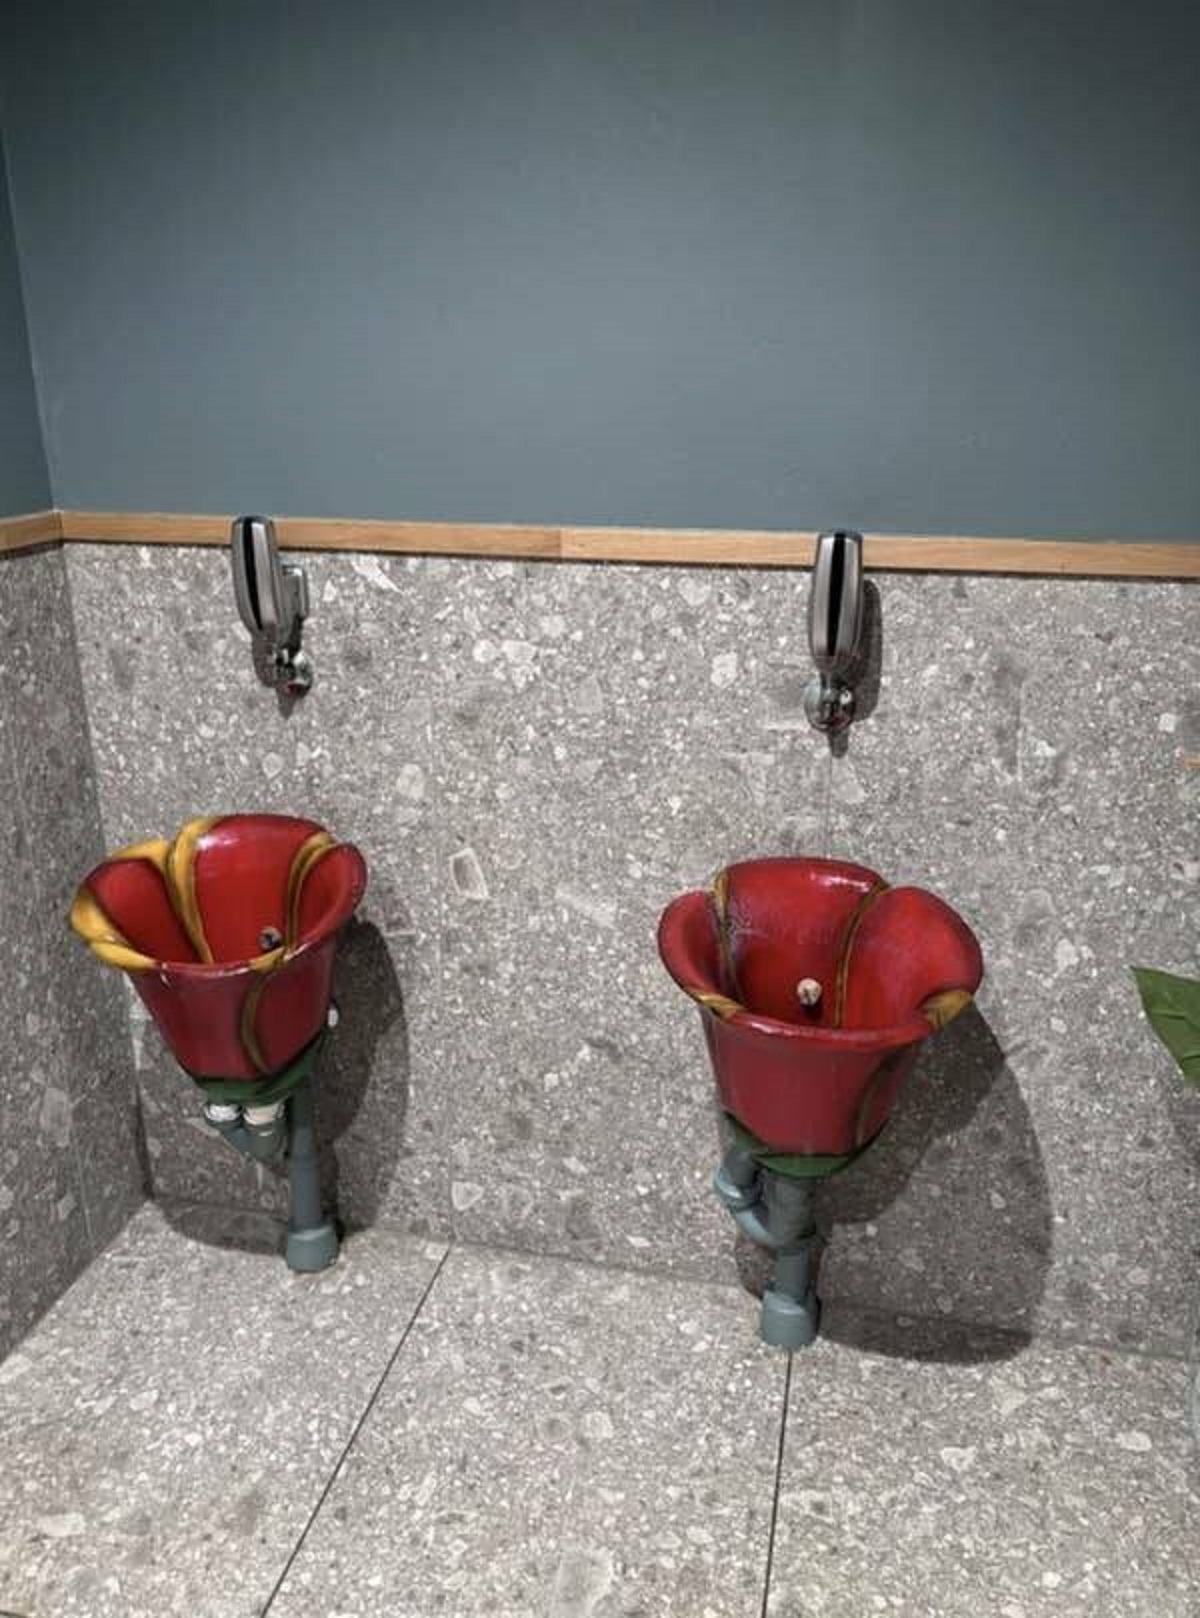 It is my sincerest wish that all urinals be as pretty as these ones in Denmark.